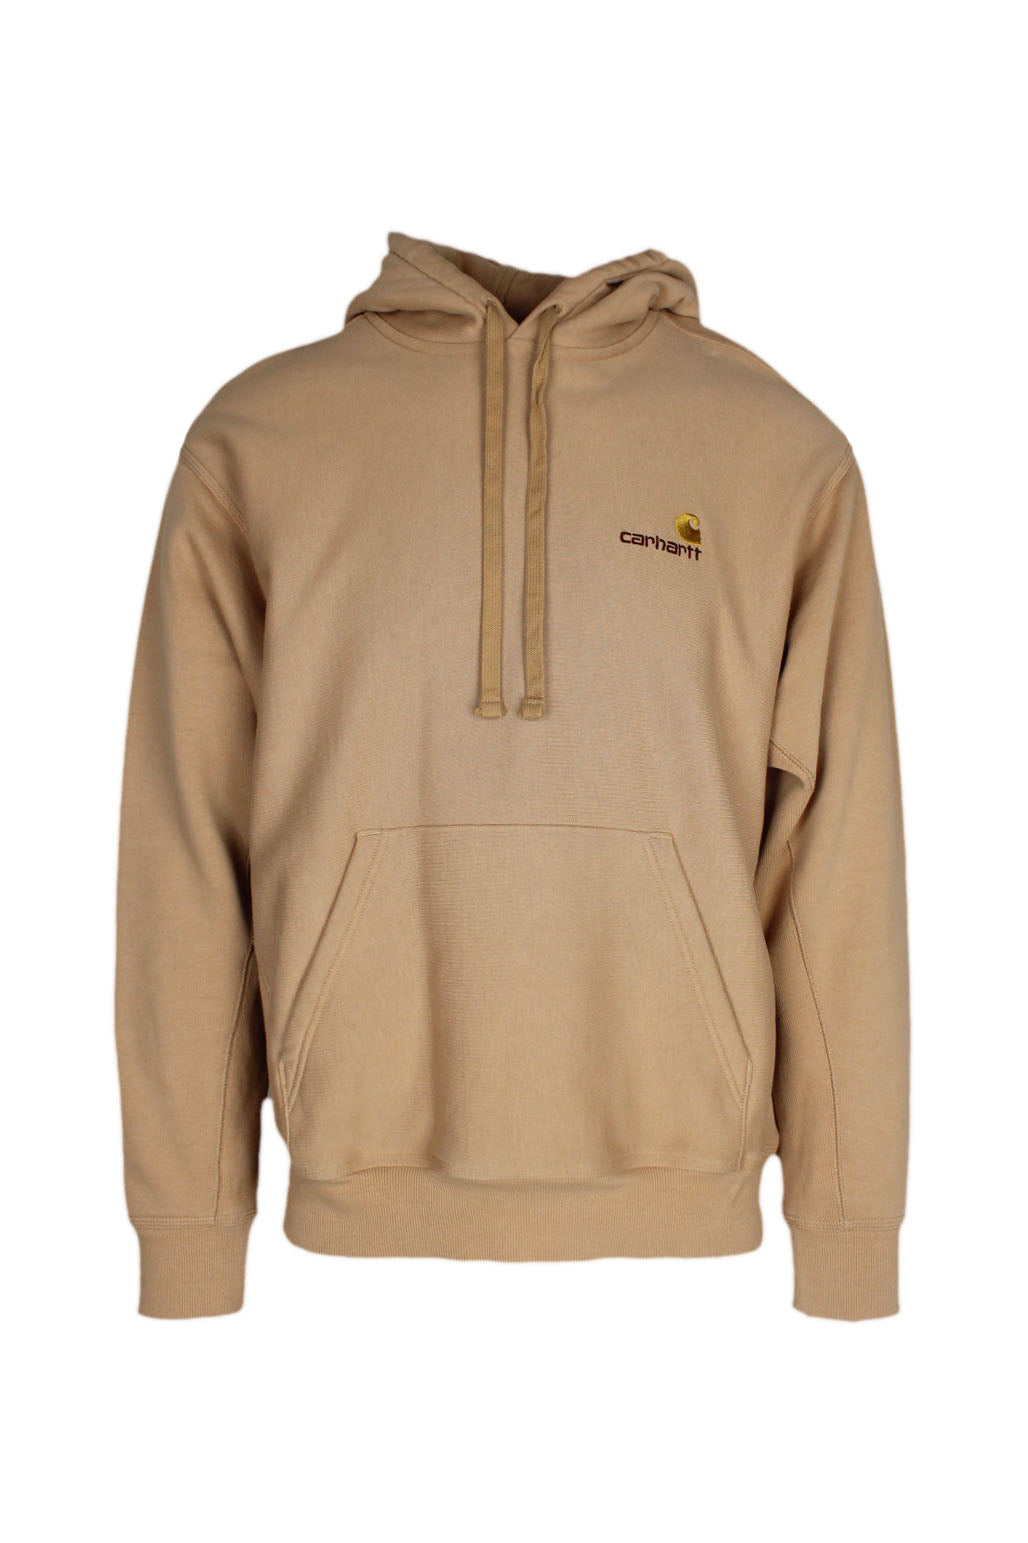 front view of carhartt work in progress carmel ‘american script’ pullover hoodie. features ‘carhartt’ logo embroidered at left breast, drawstrings at hood, and ribbed cuffs/hem.